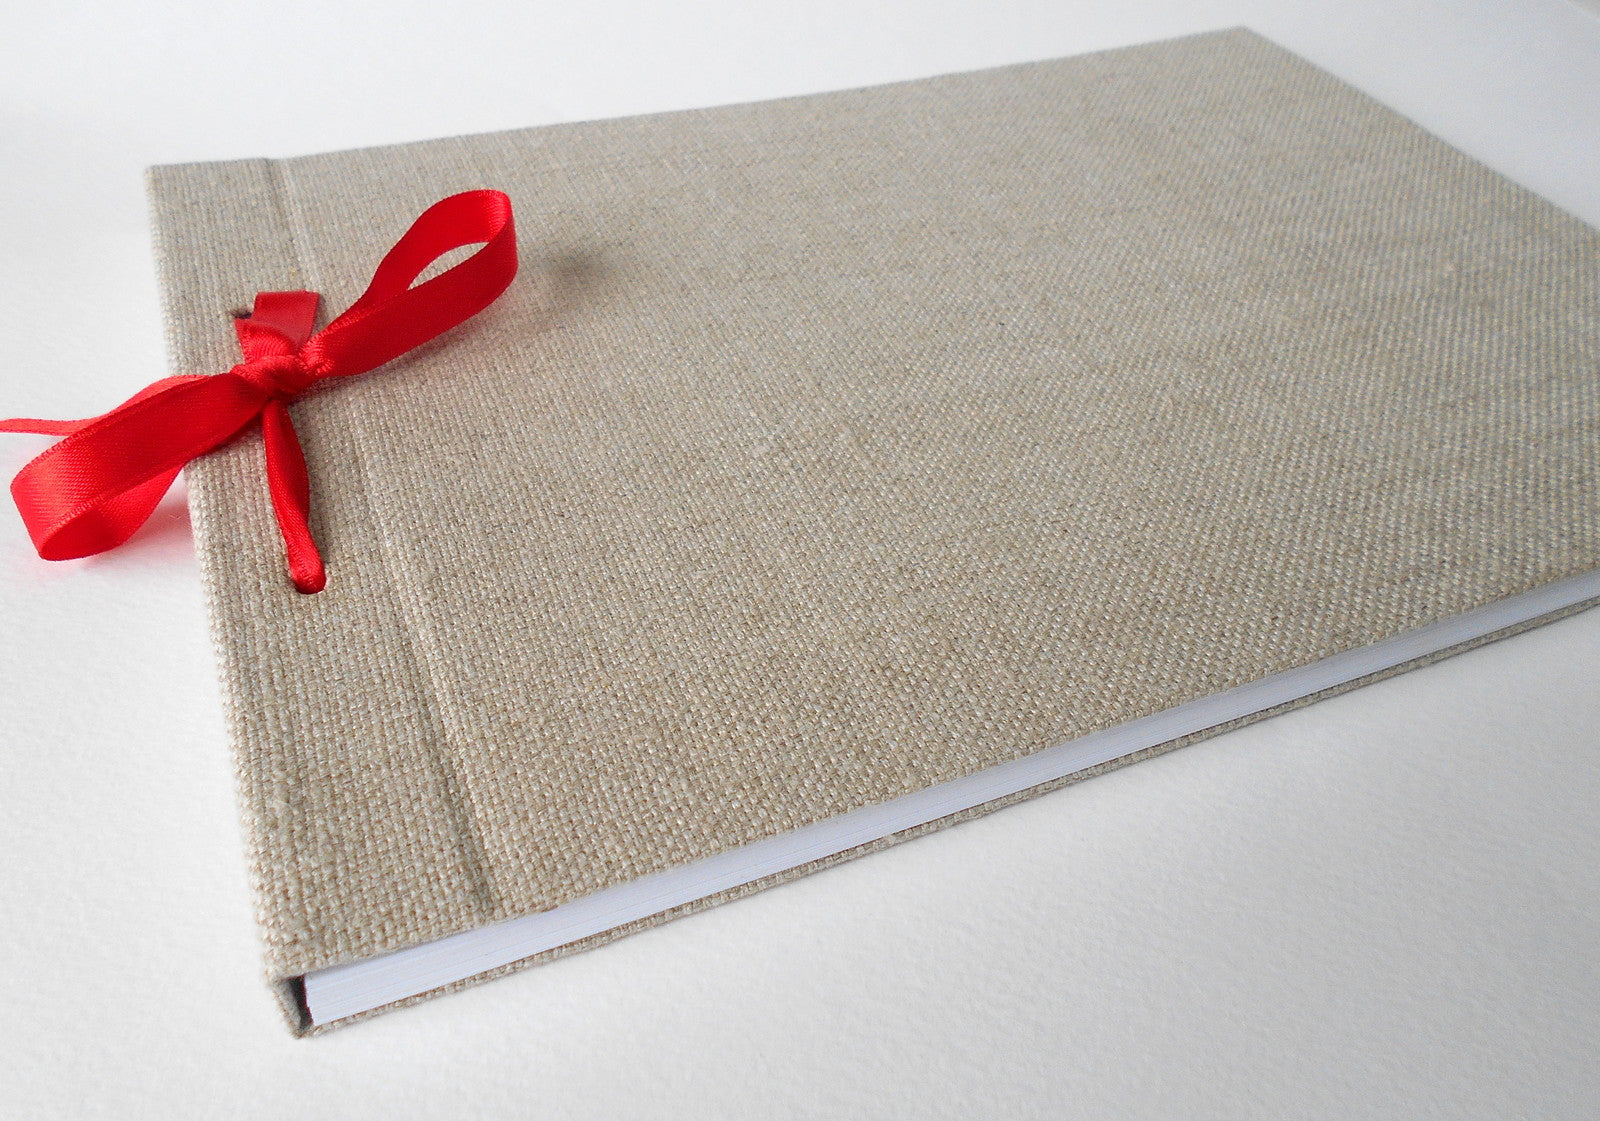 Handmade fabric sketchbook journal- Choose from 100 to 1000 pages- hardcovers- personalized ecofriendly blank sketchbook